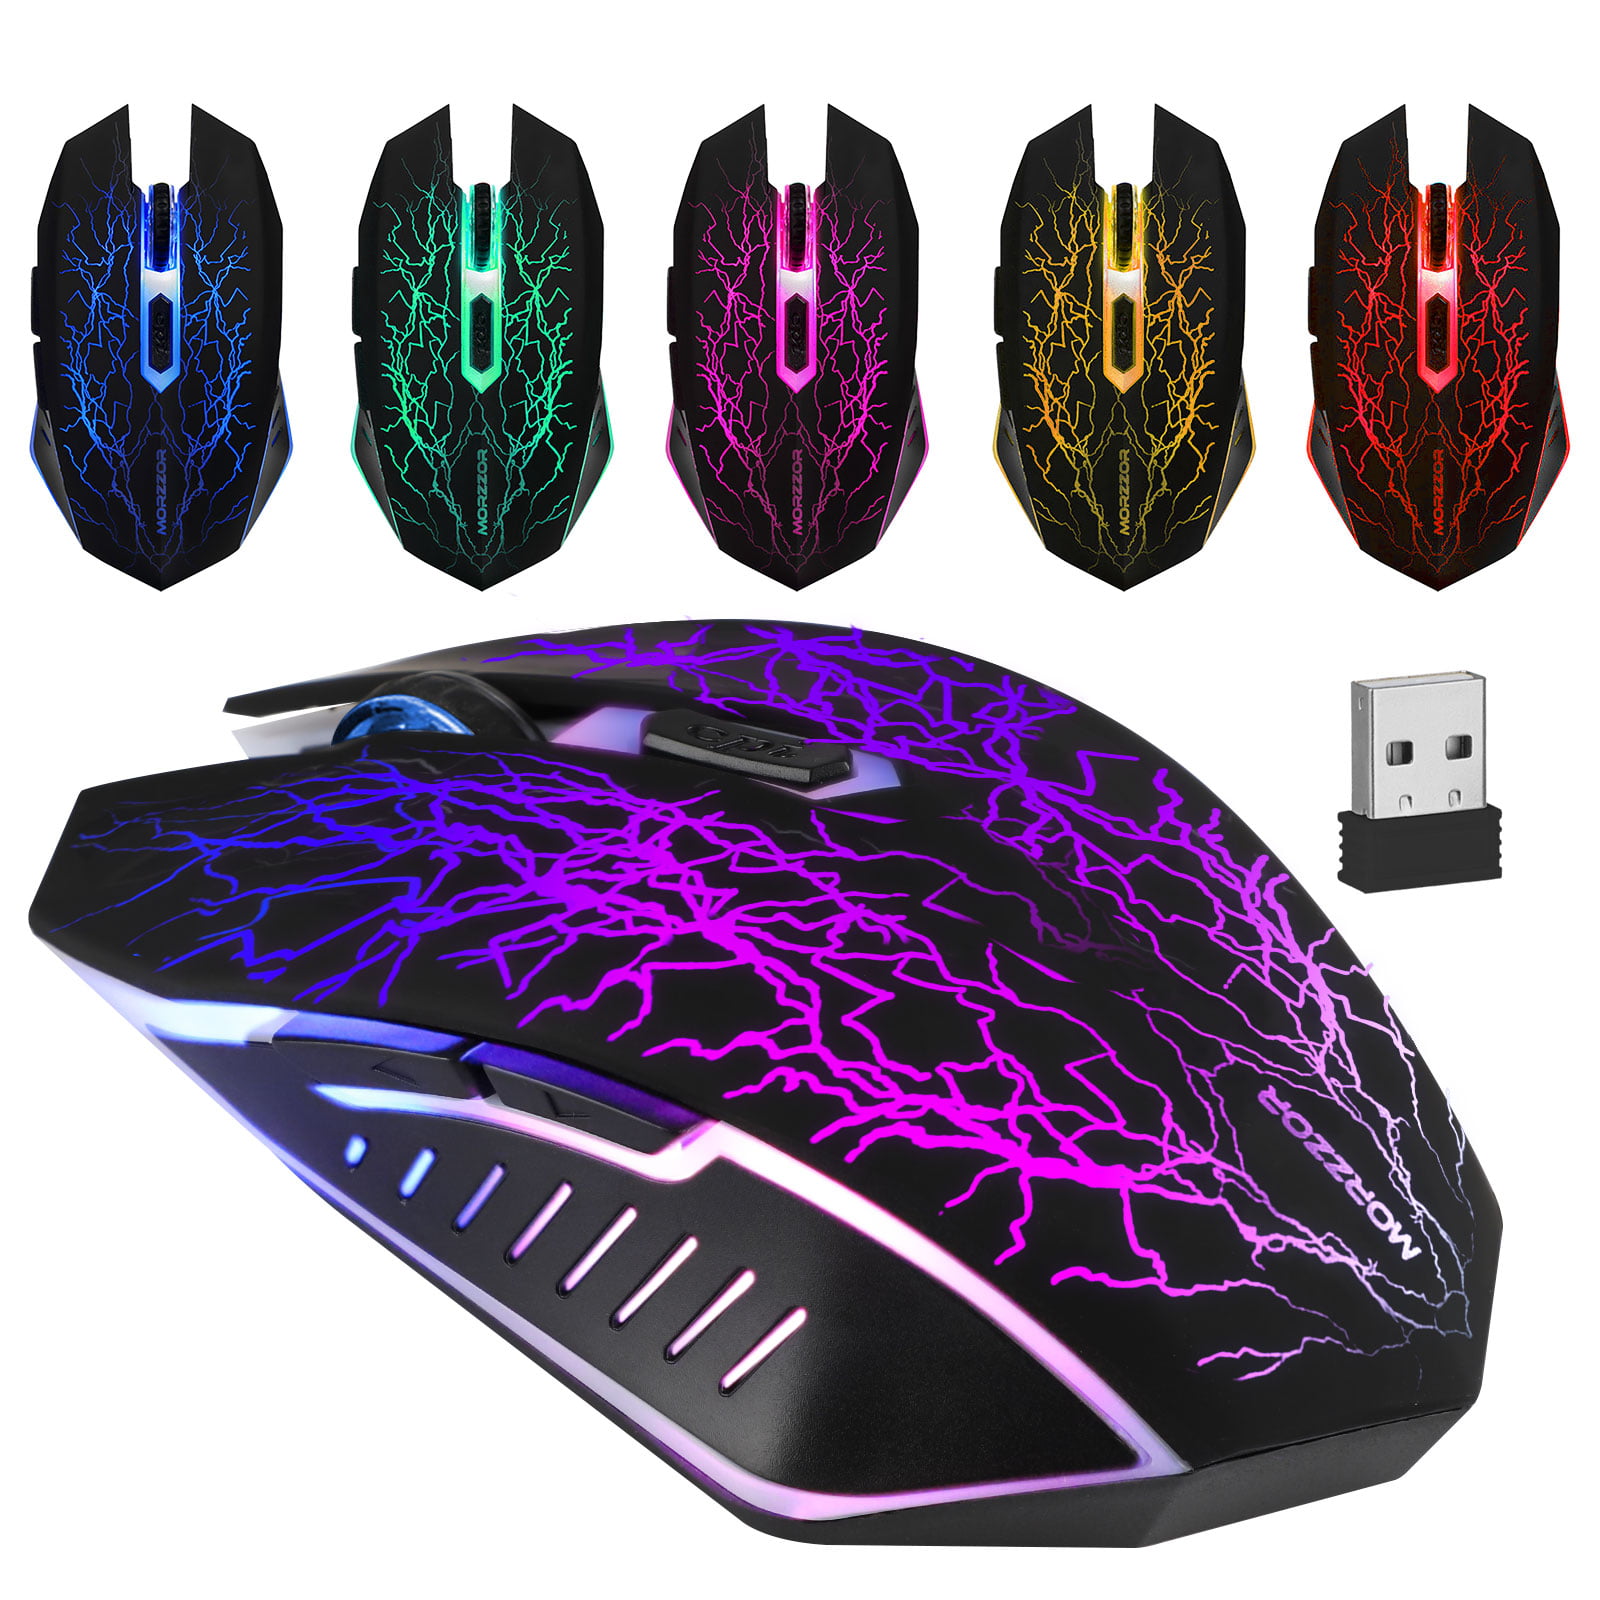 Big Sale 2.4 GHz Wireless Optical Gamer Mouse Mice for PC laptop Win/Mac 3 DPI 